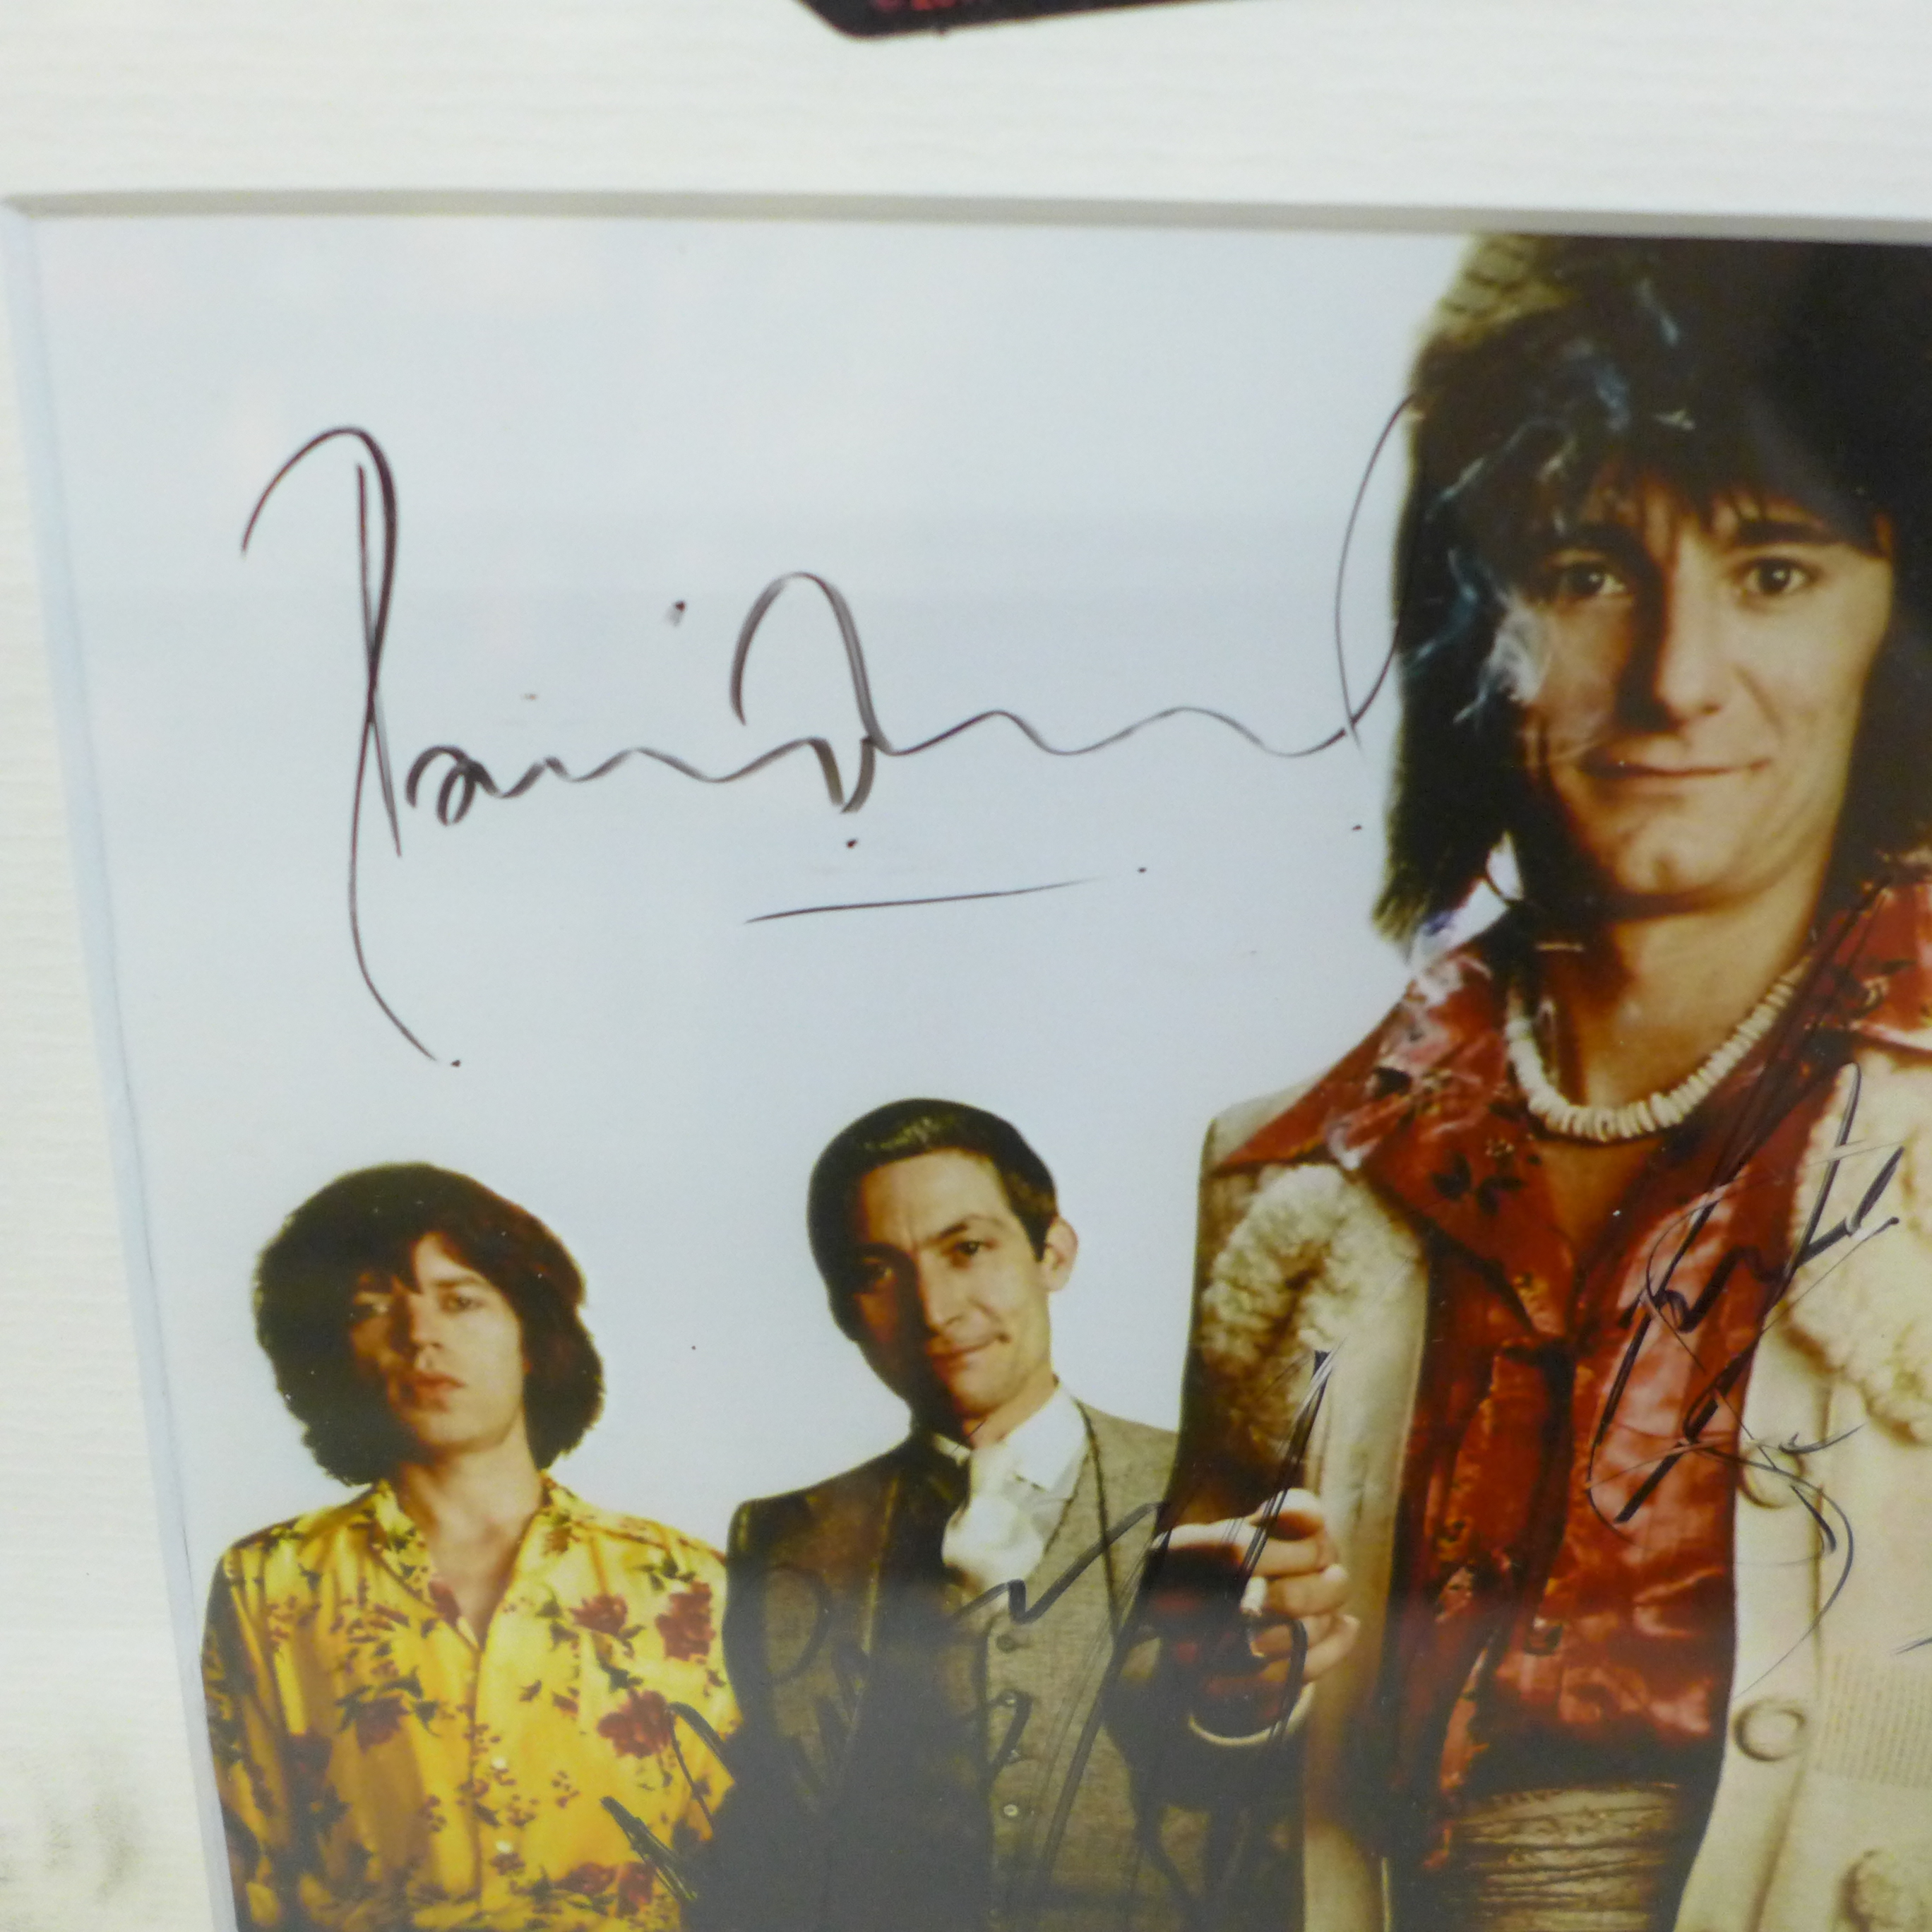 Rolling Stones; Mick Jagger, Ronnie Wood, Keith Richards and Charlie Watts signed photograph with - Image 2 of 5